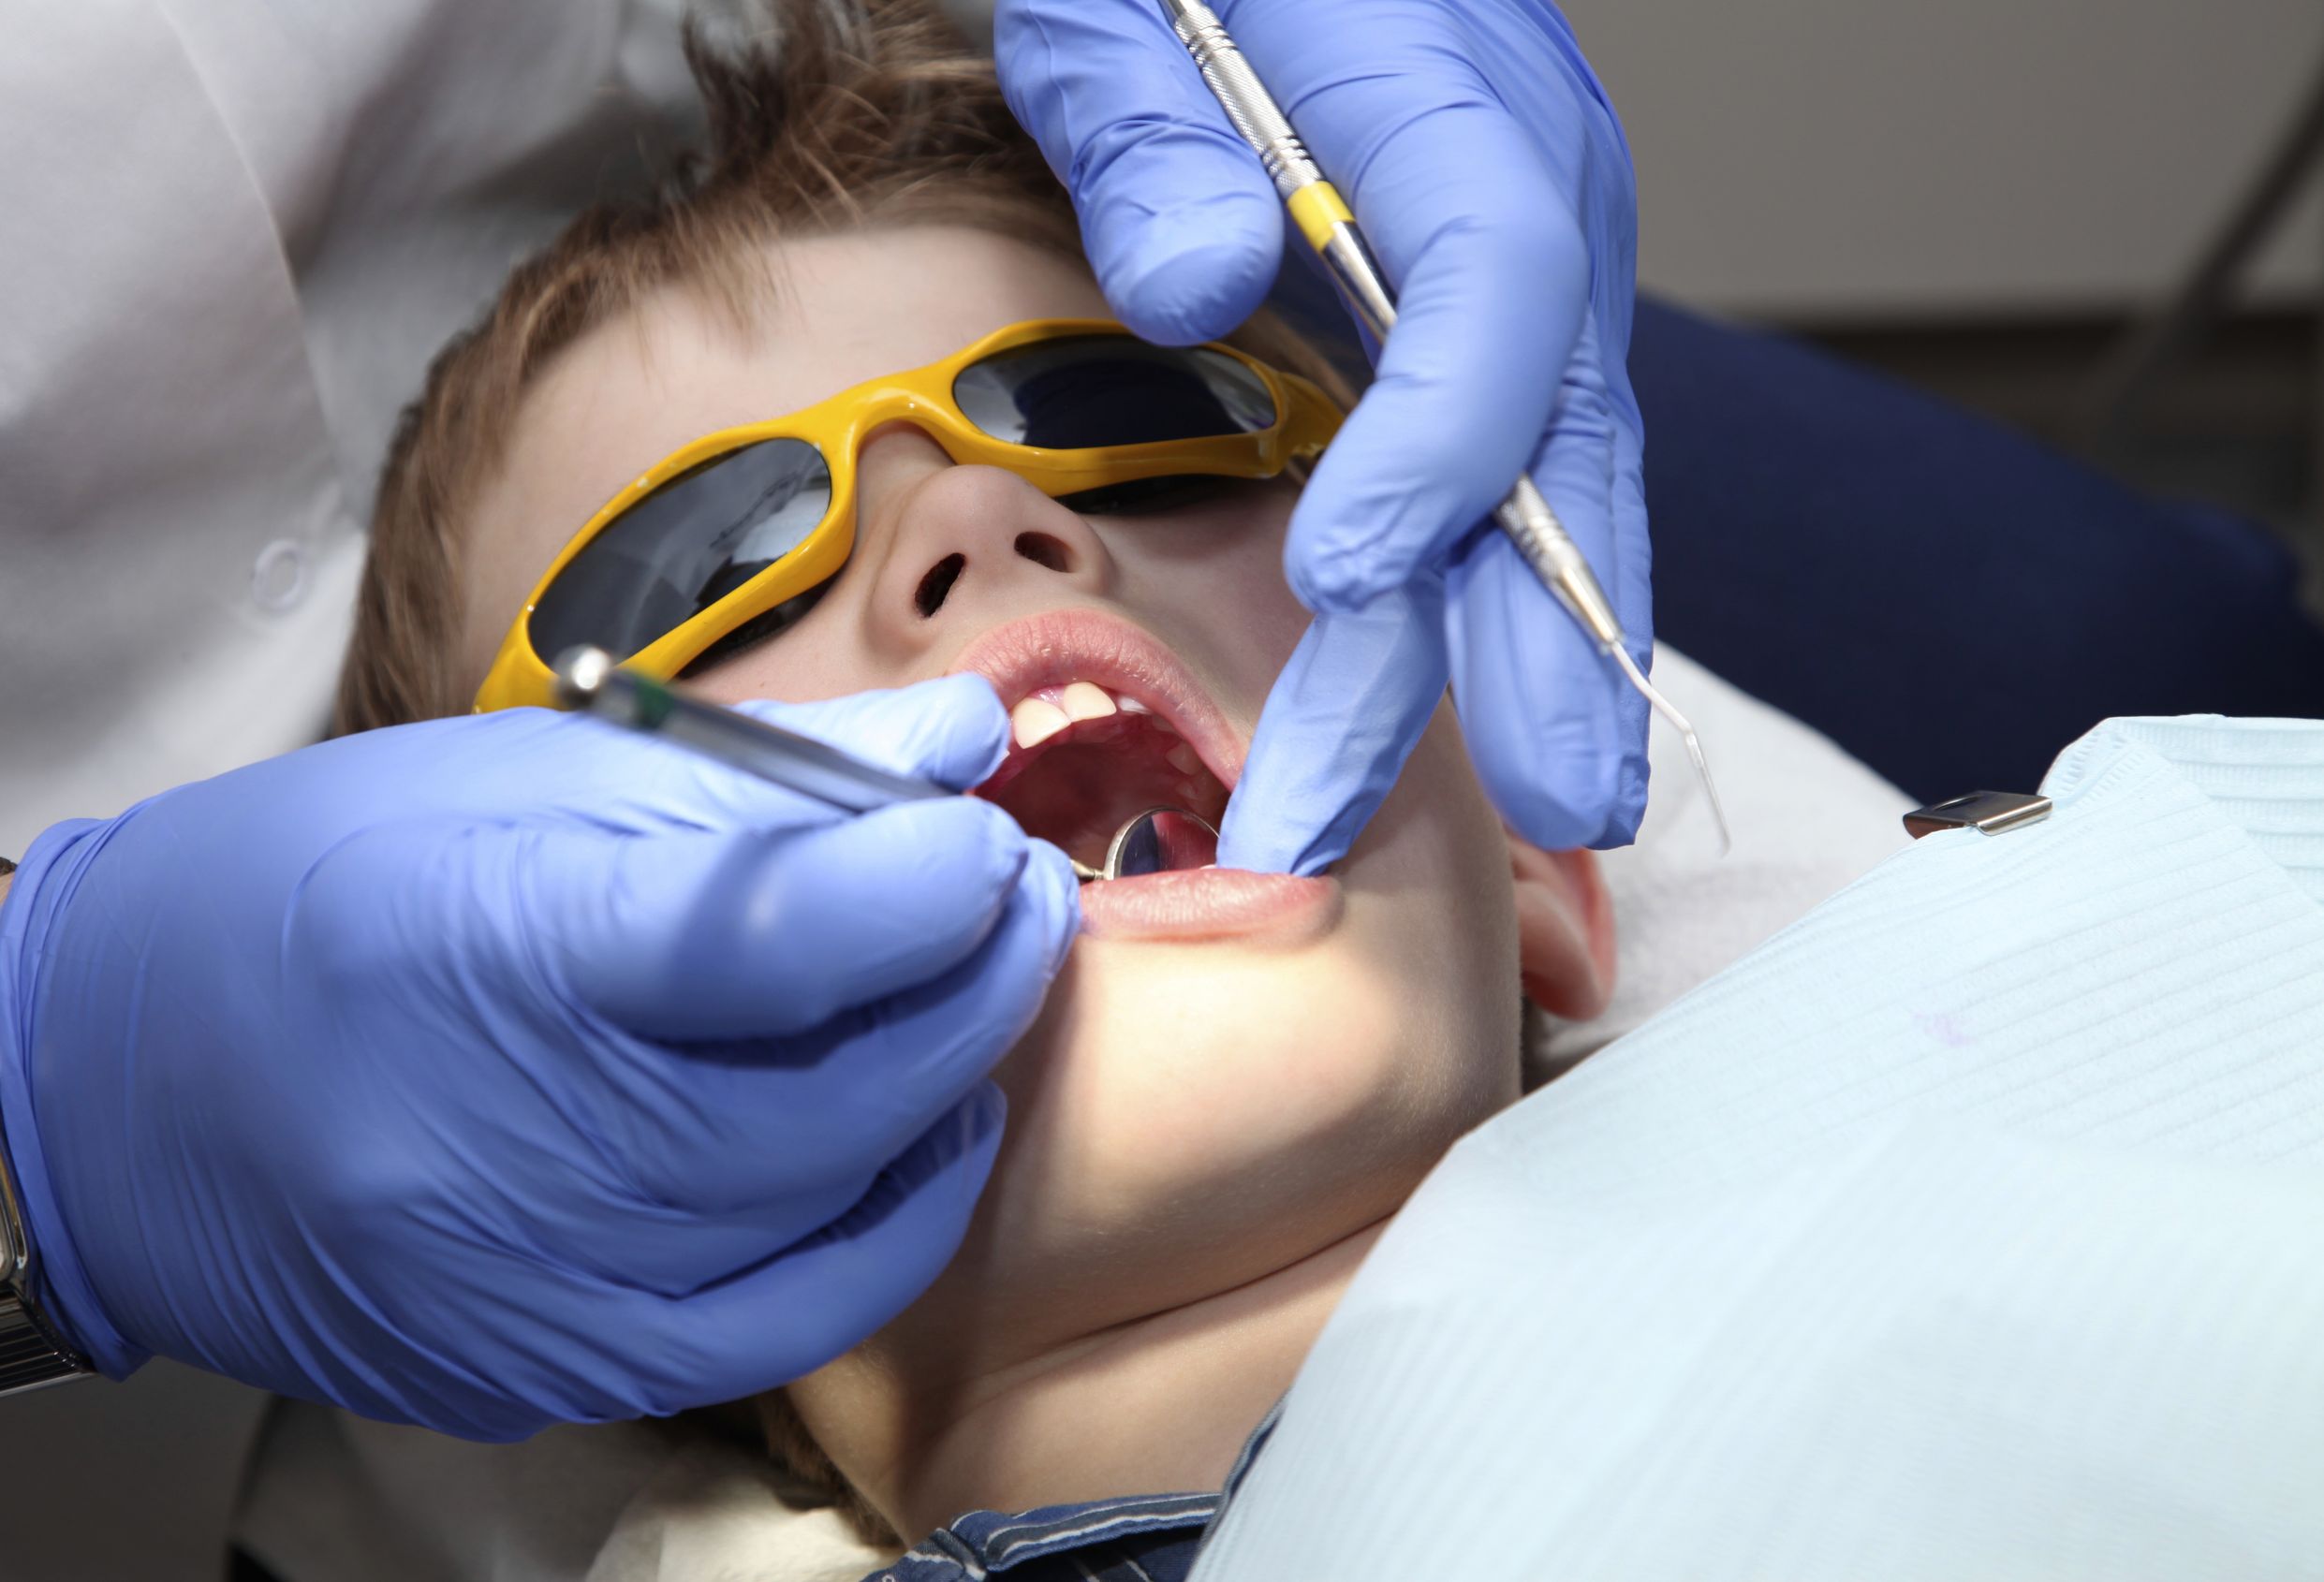 When The Pain Won’t Stop, Contact An Emergency Dentist in Villas